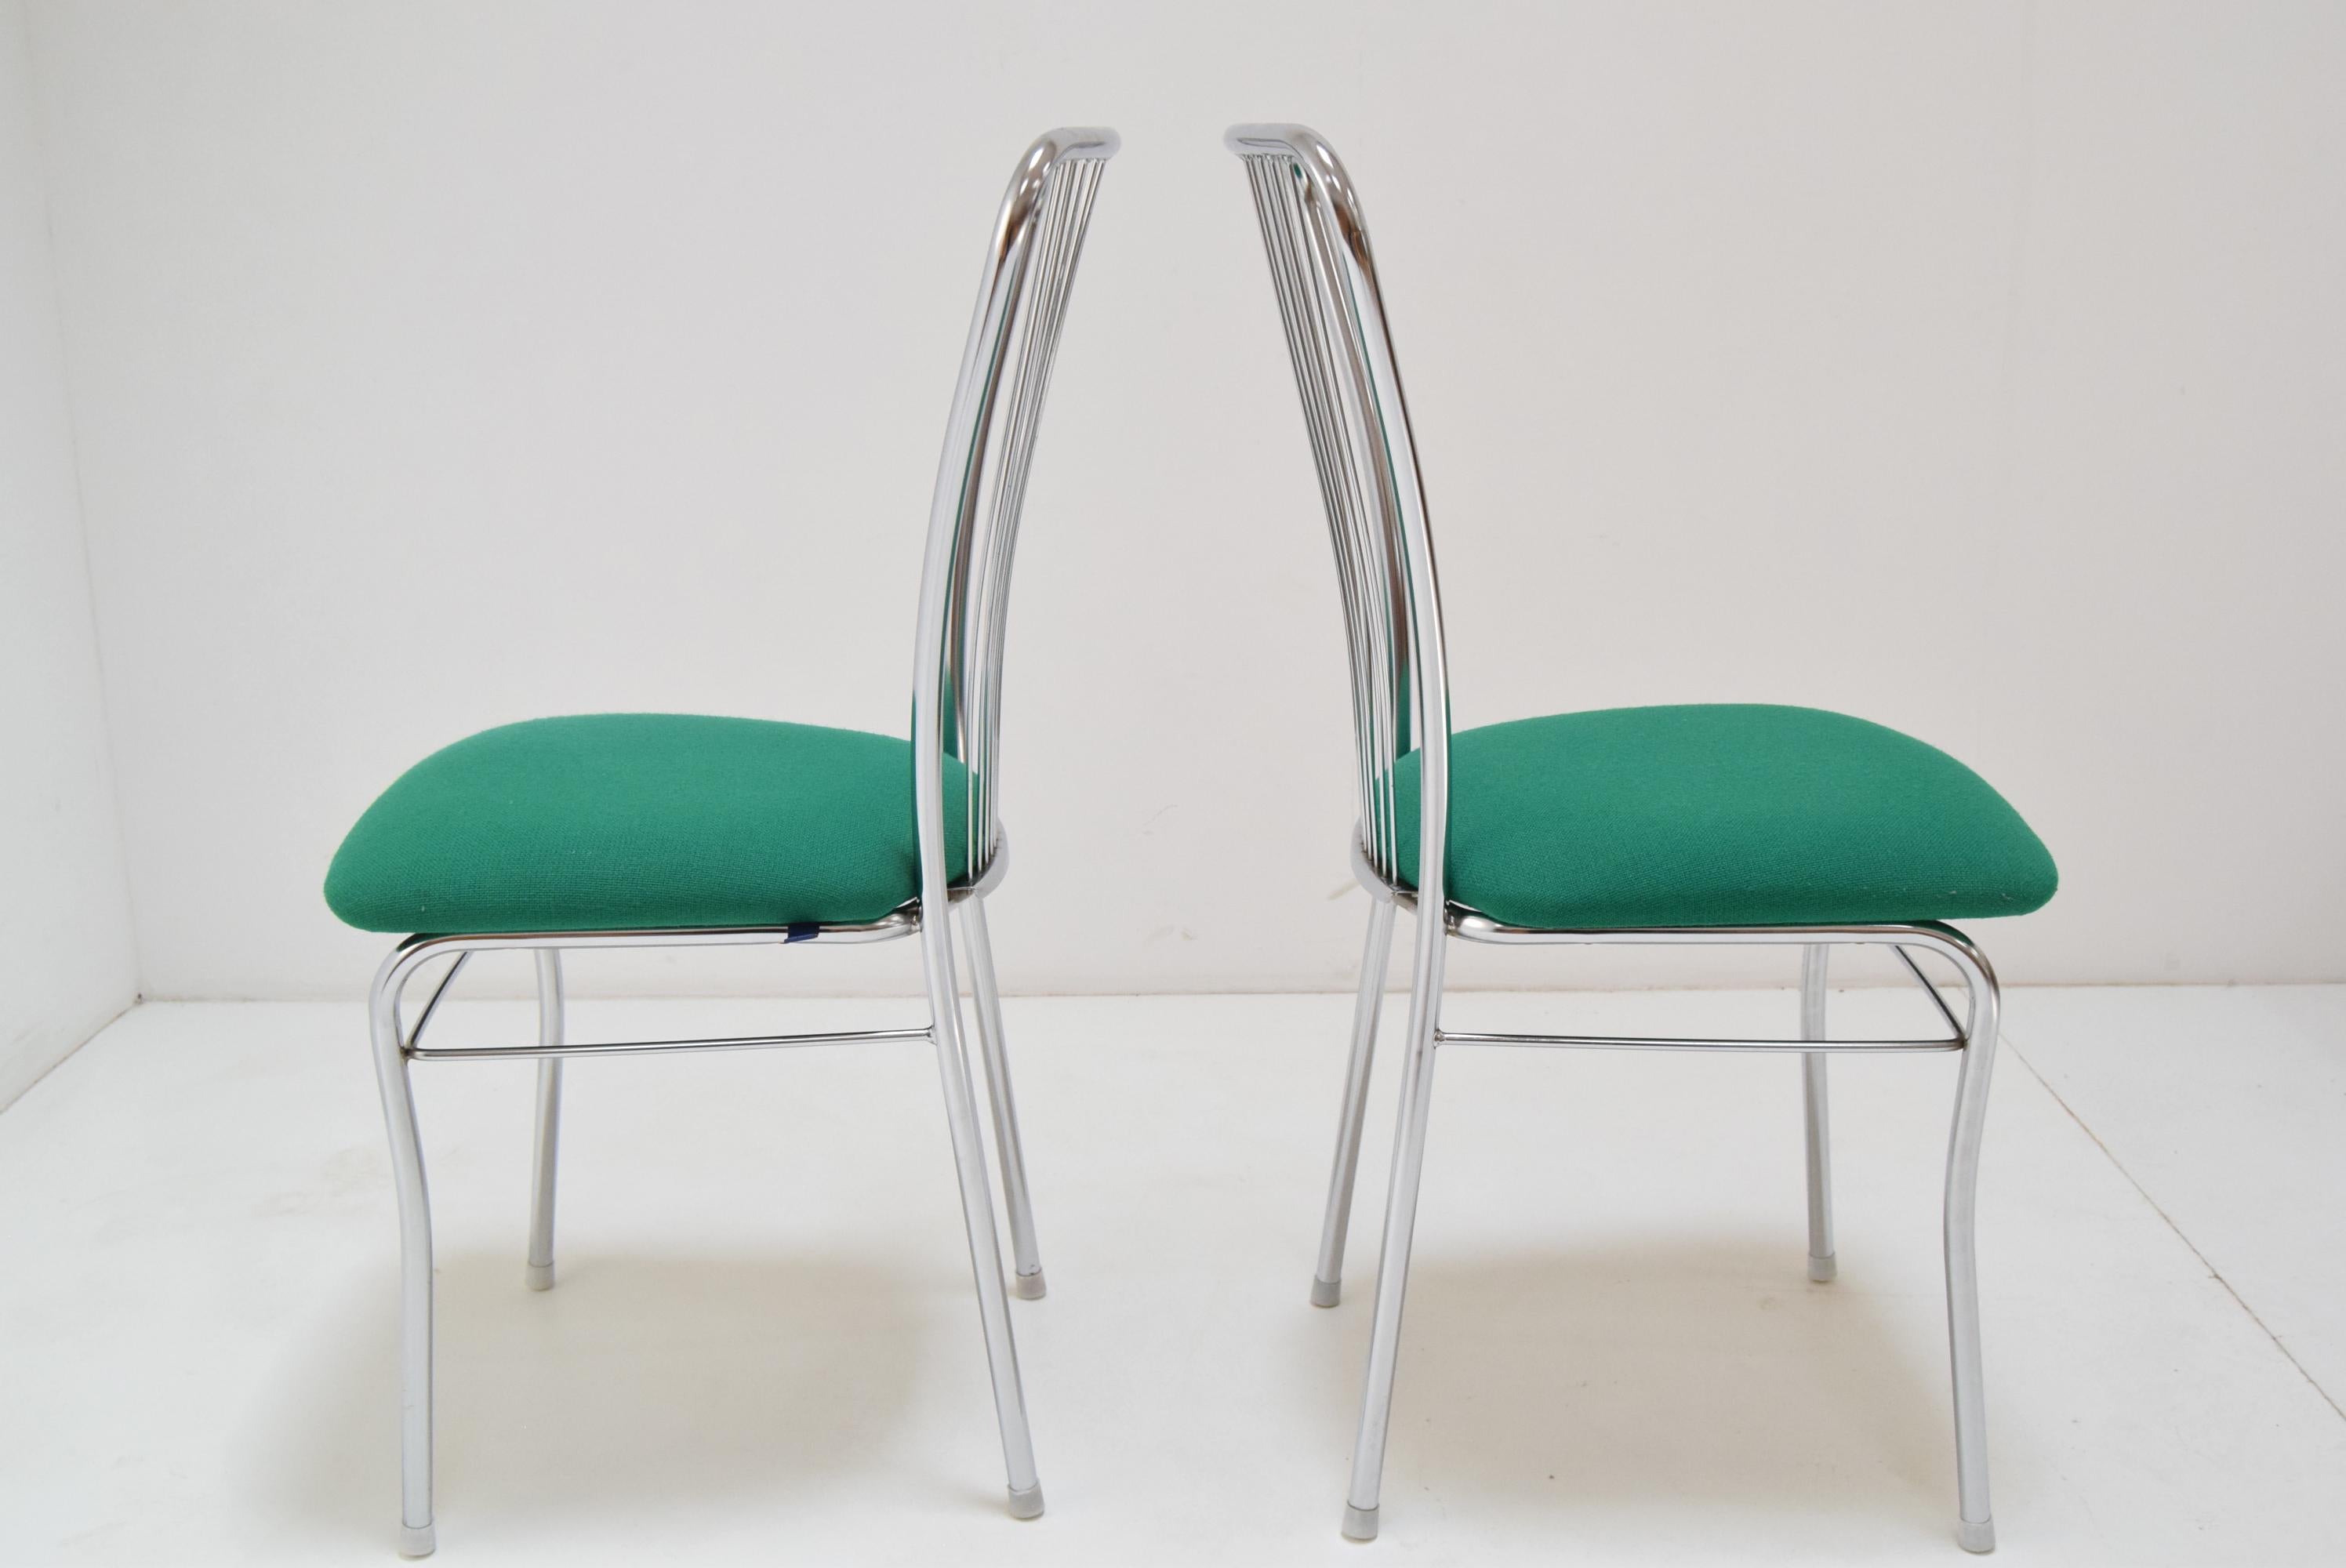 Late 20th Century Pair of Mid-Century Chrome Chairs, Nowy Styl, circa 1980's For Sale